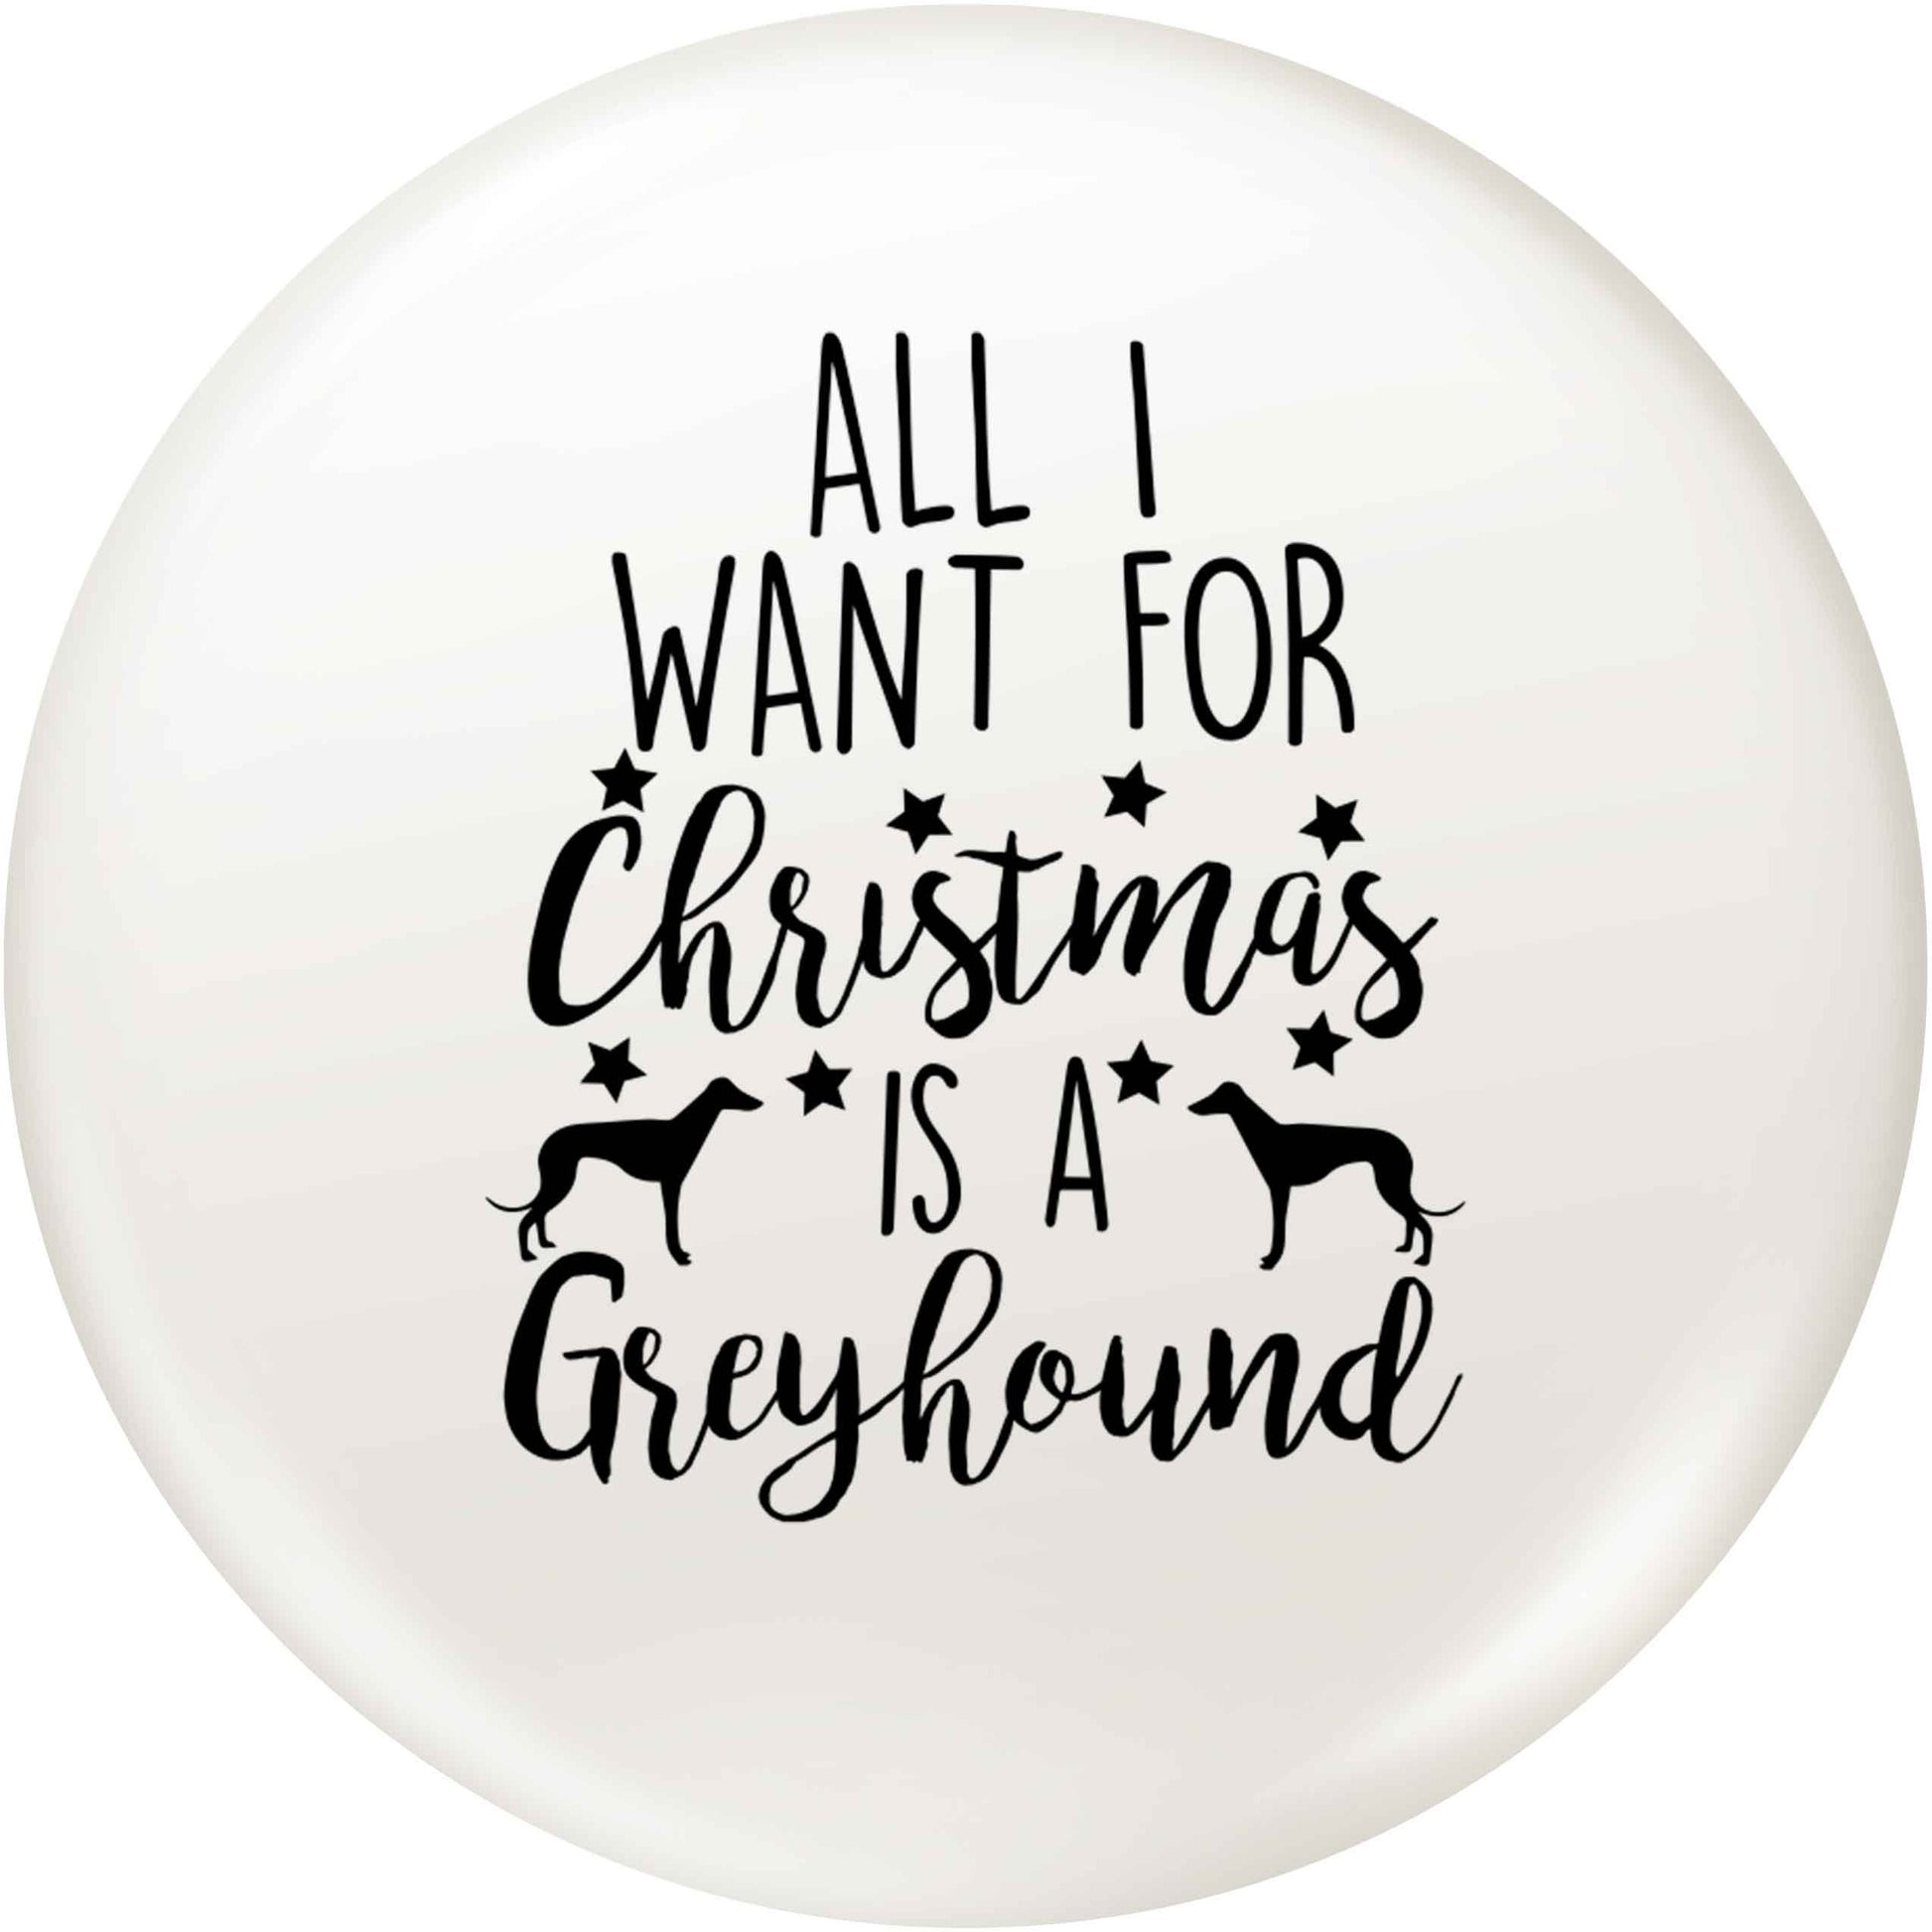 All I want for Christmas is a greyhound small 25mm Pin badge